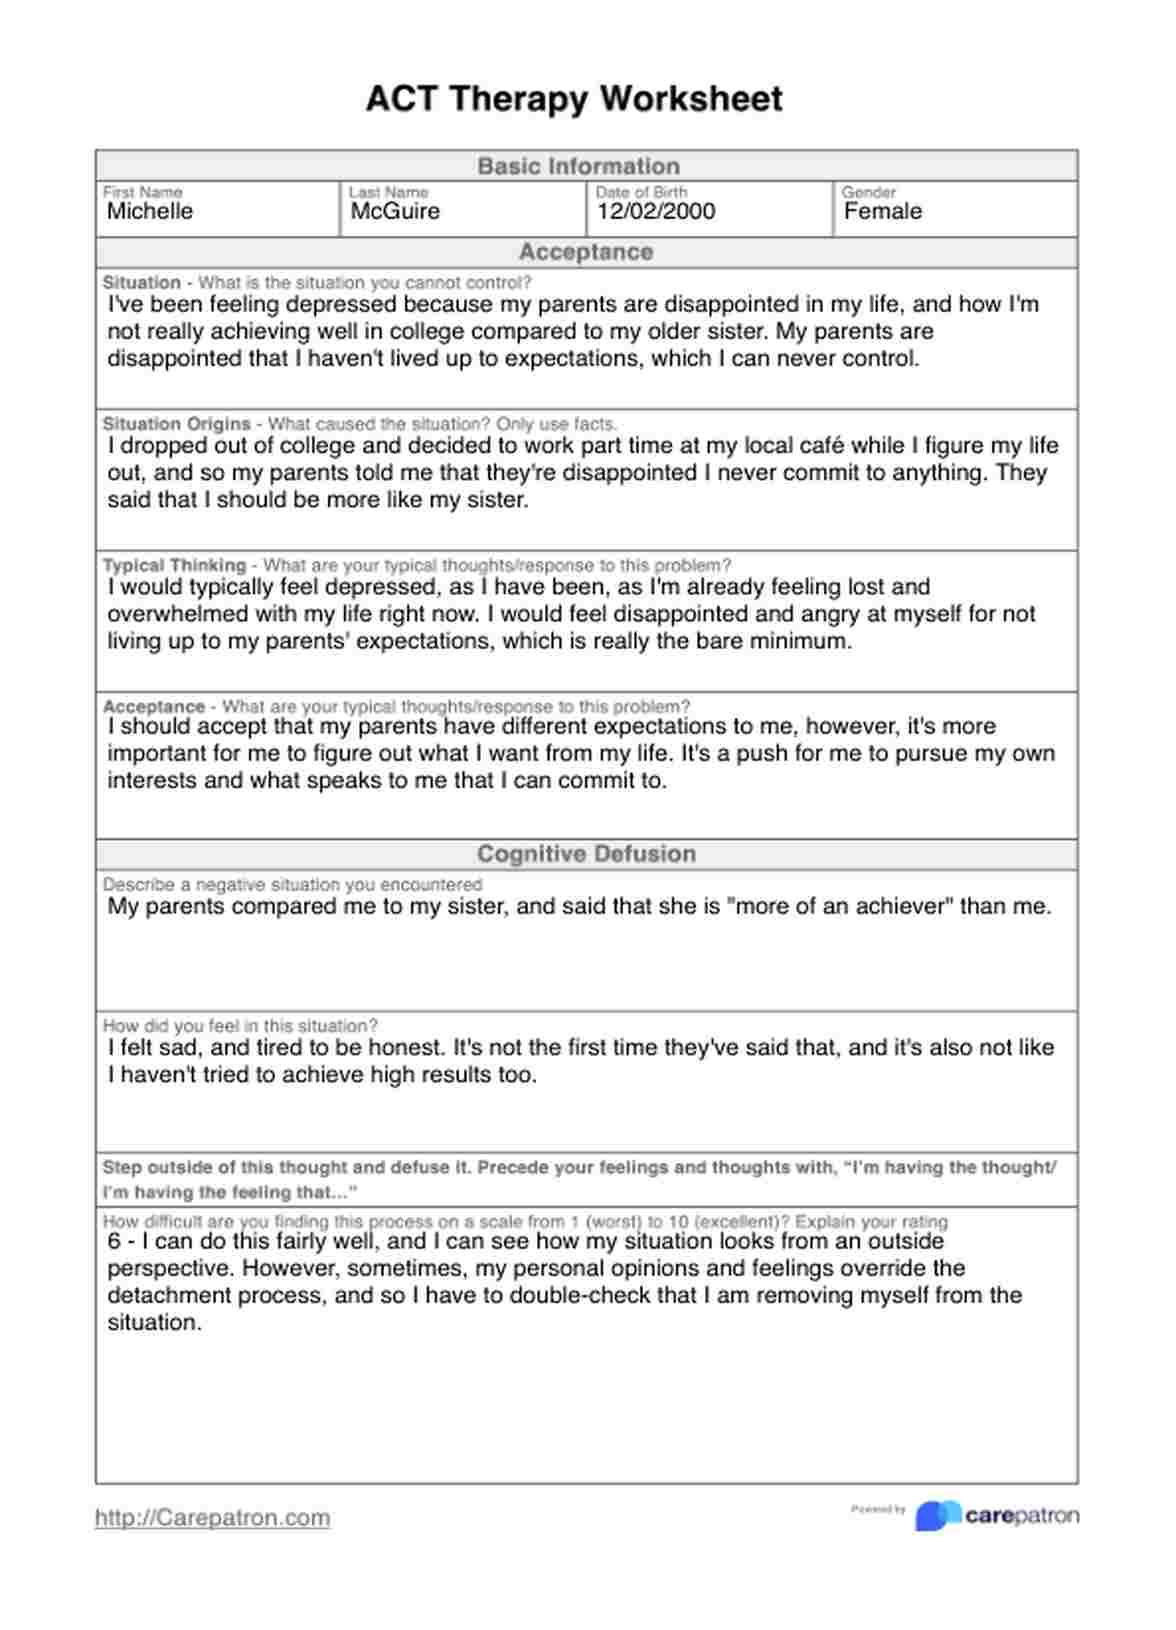 ACT Therapy Worksheet PDF Example